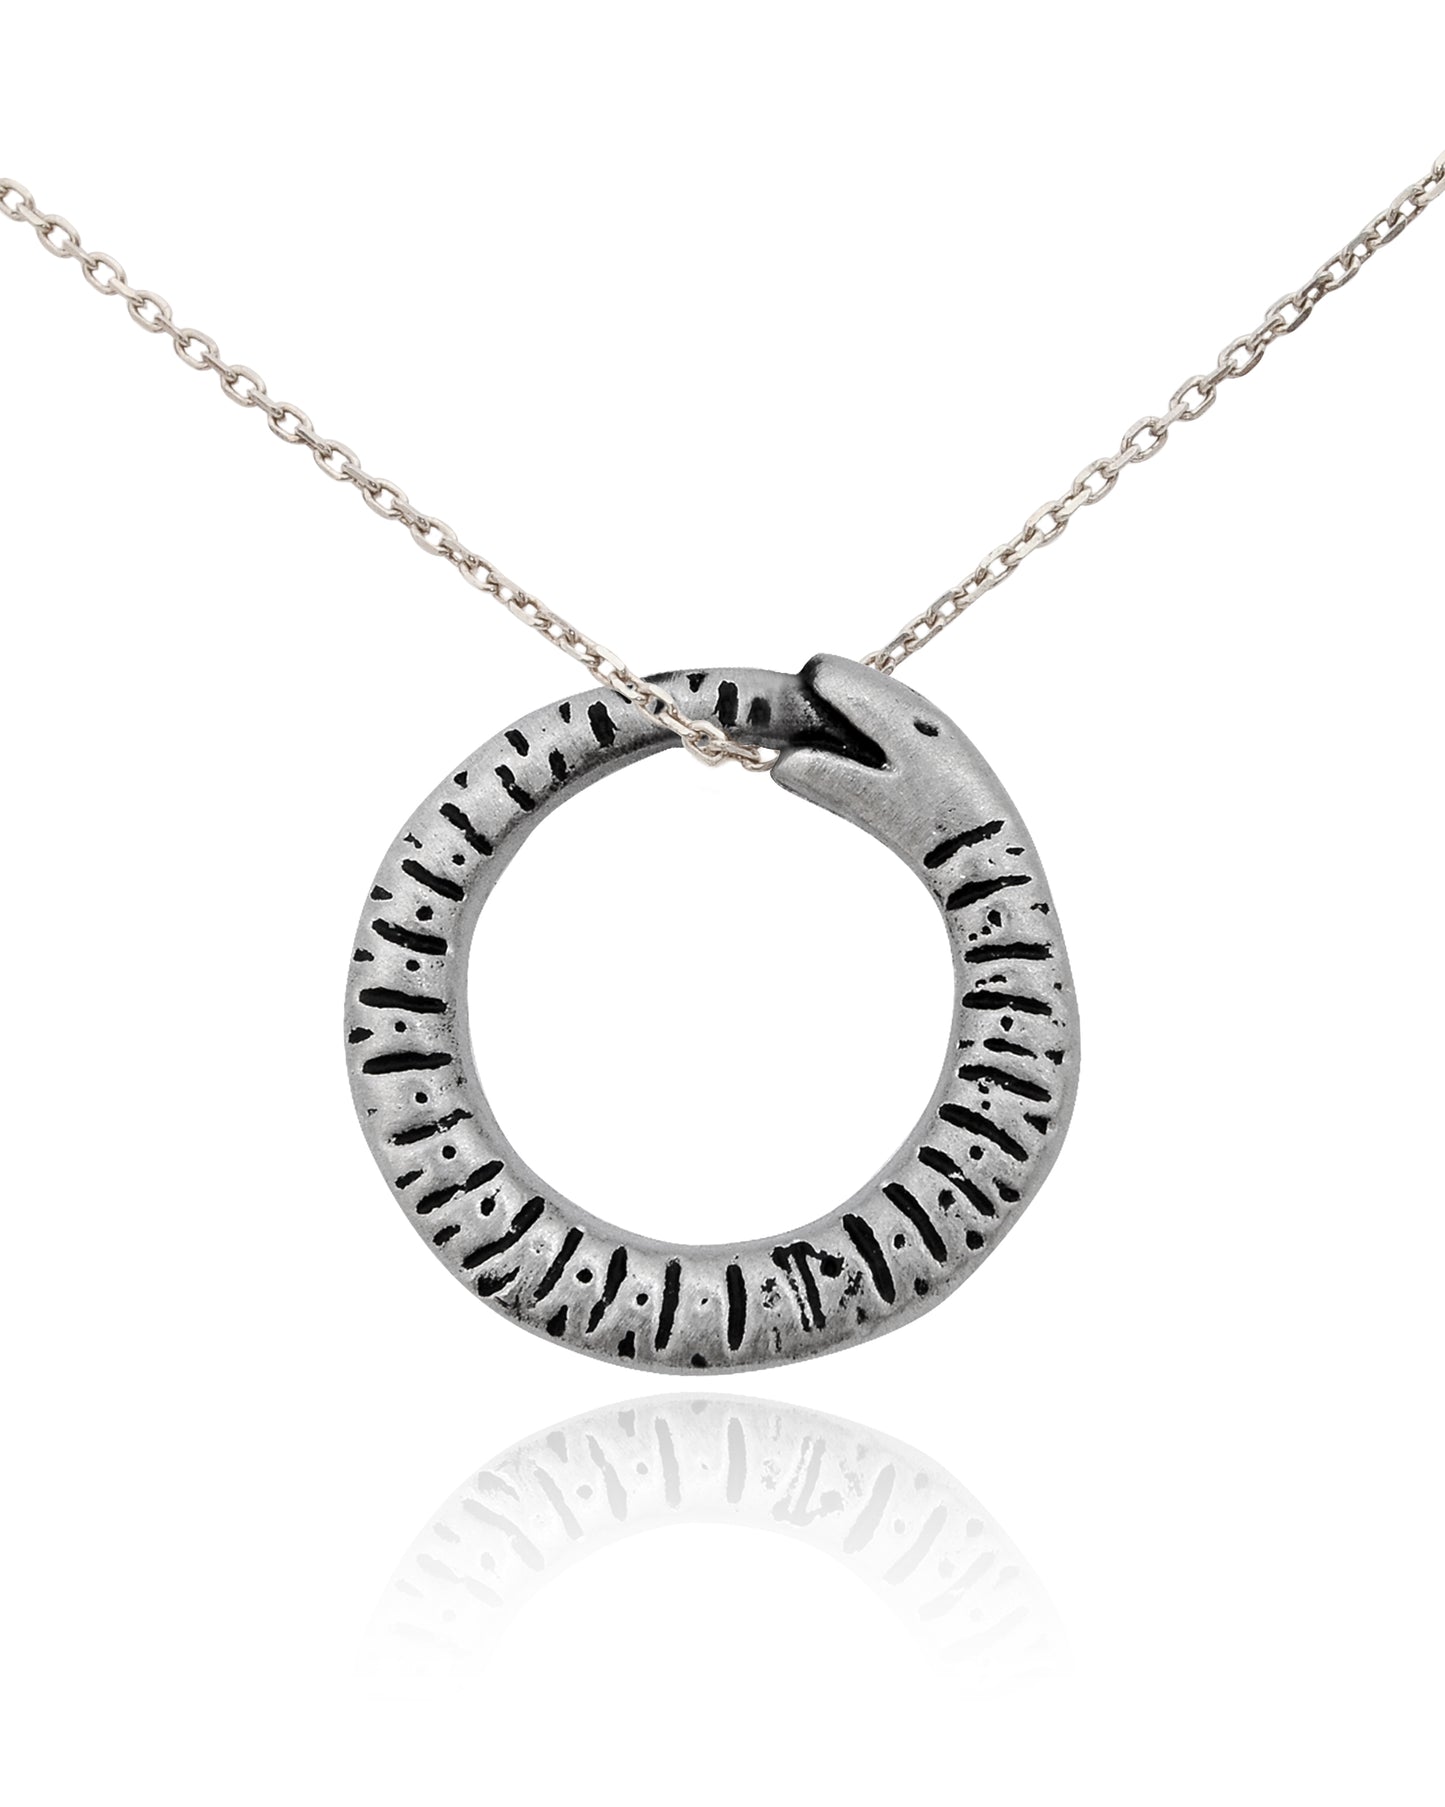 Ouroboros Serpent Snake Silver Pewter Gold Brass Charm Necklace Pendant Jewelry